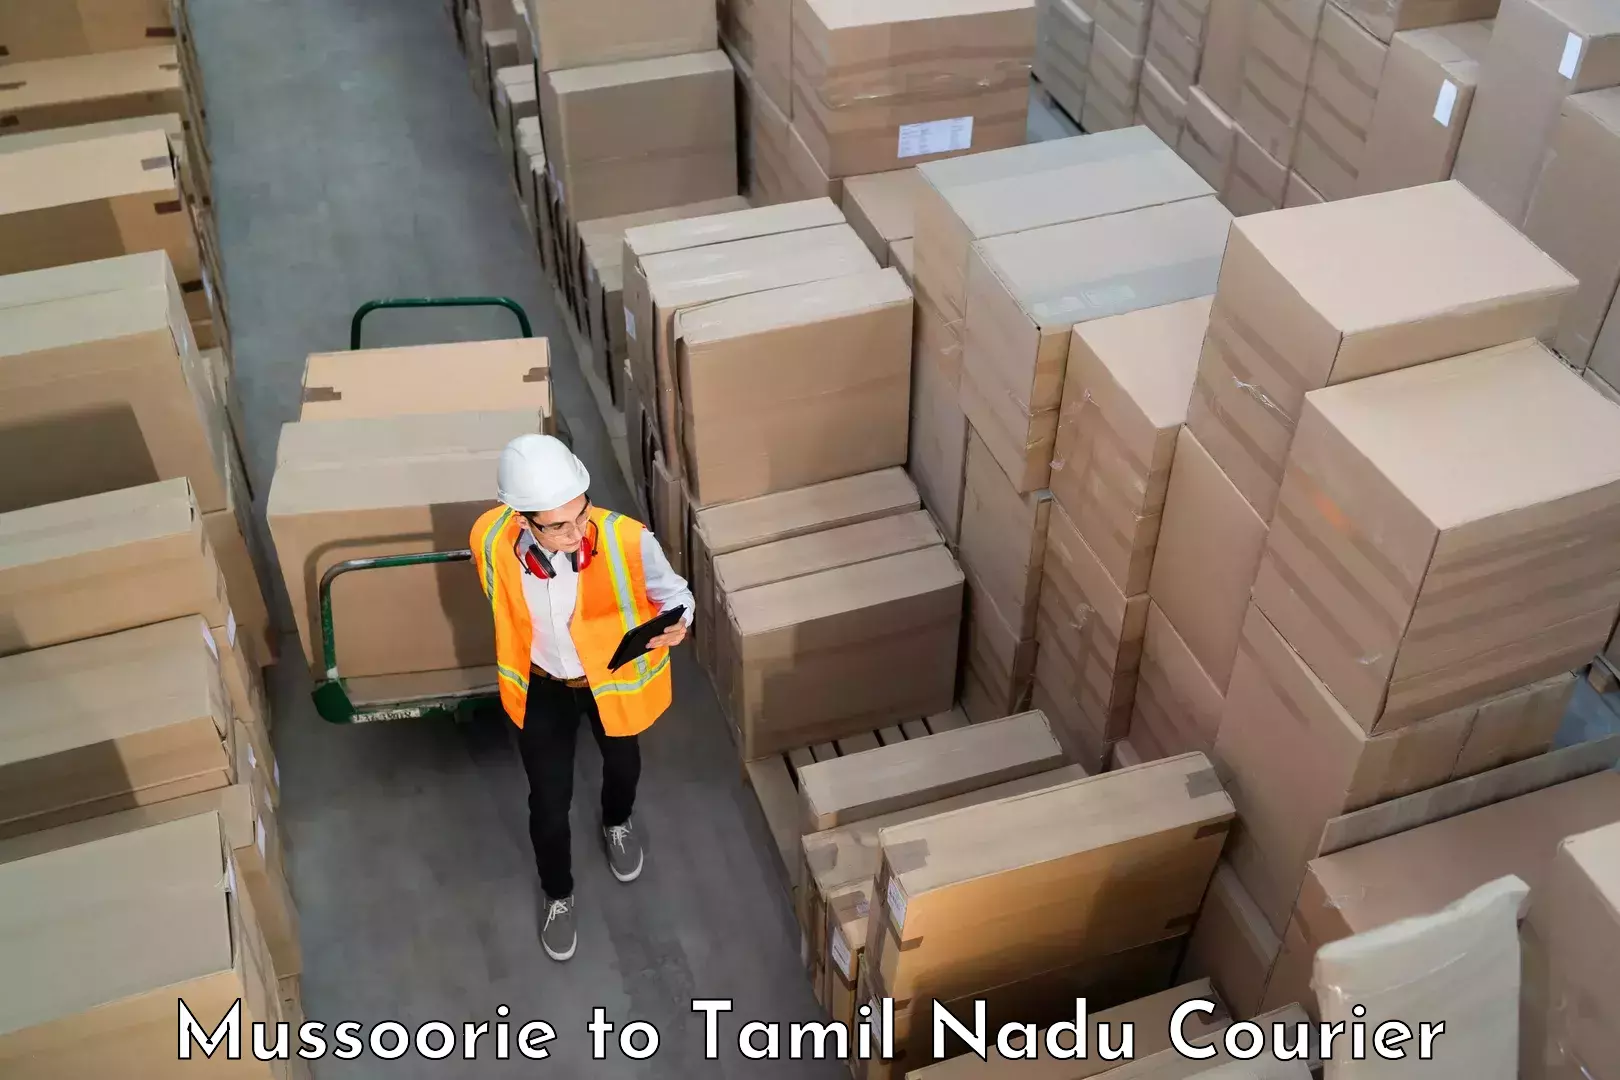 Luggage transport company Mussoorie to Tamil Nadu